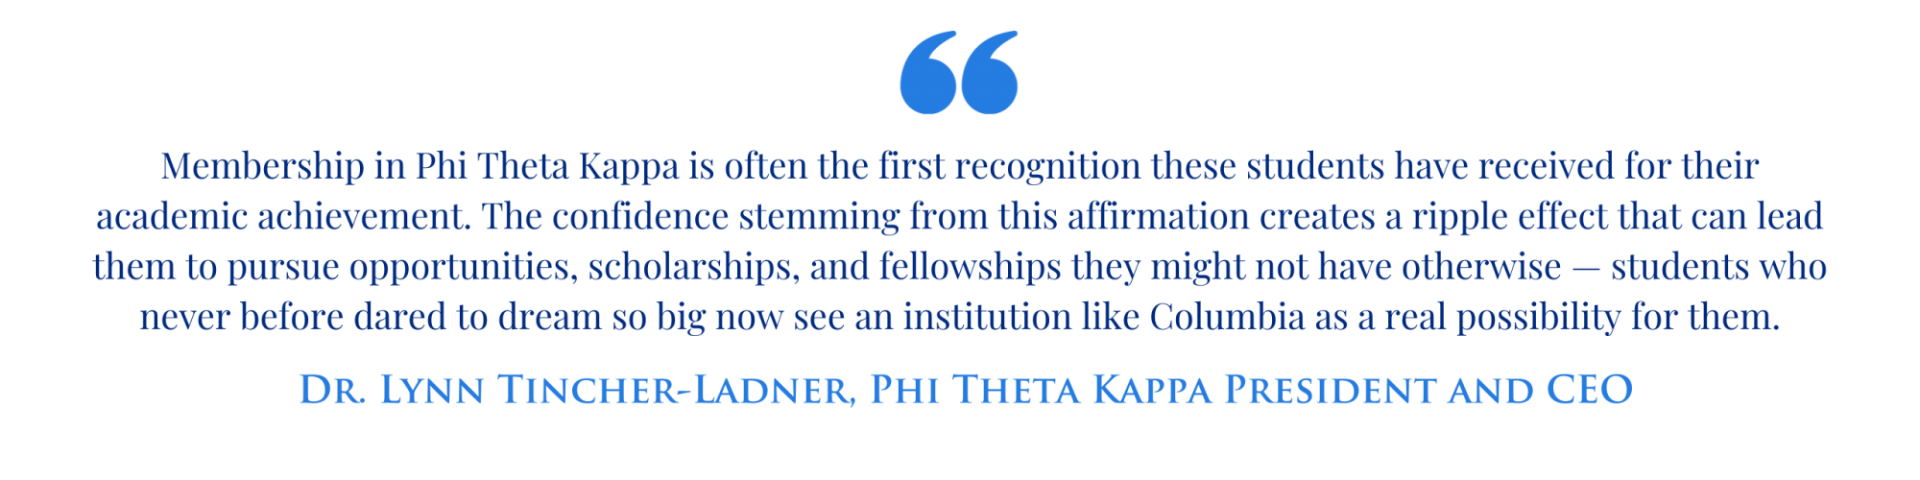 "Membership in Phi Theta Kappa is often the first recognition these students have received for their academic achievement. The confidence stemming from this affirmation creates a ripple effect that can lead them to pursue opportunities, scholarships, and fellowships they might not have otherwise — students who never before dared to dream so big now see an institution like Columbia as a real possibility for them." - Dr. Lynn Tincher-Ladner, Phi Theta Kappa President and CEO